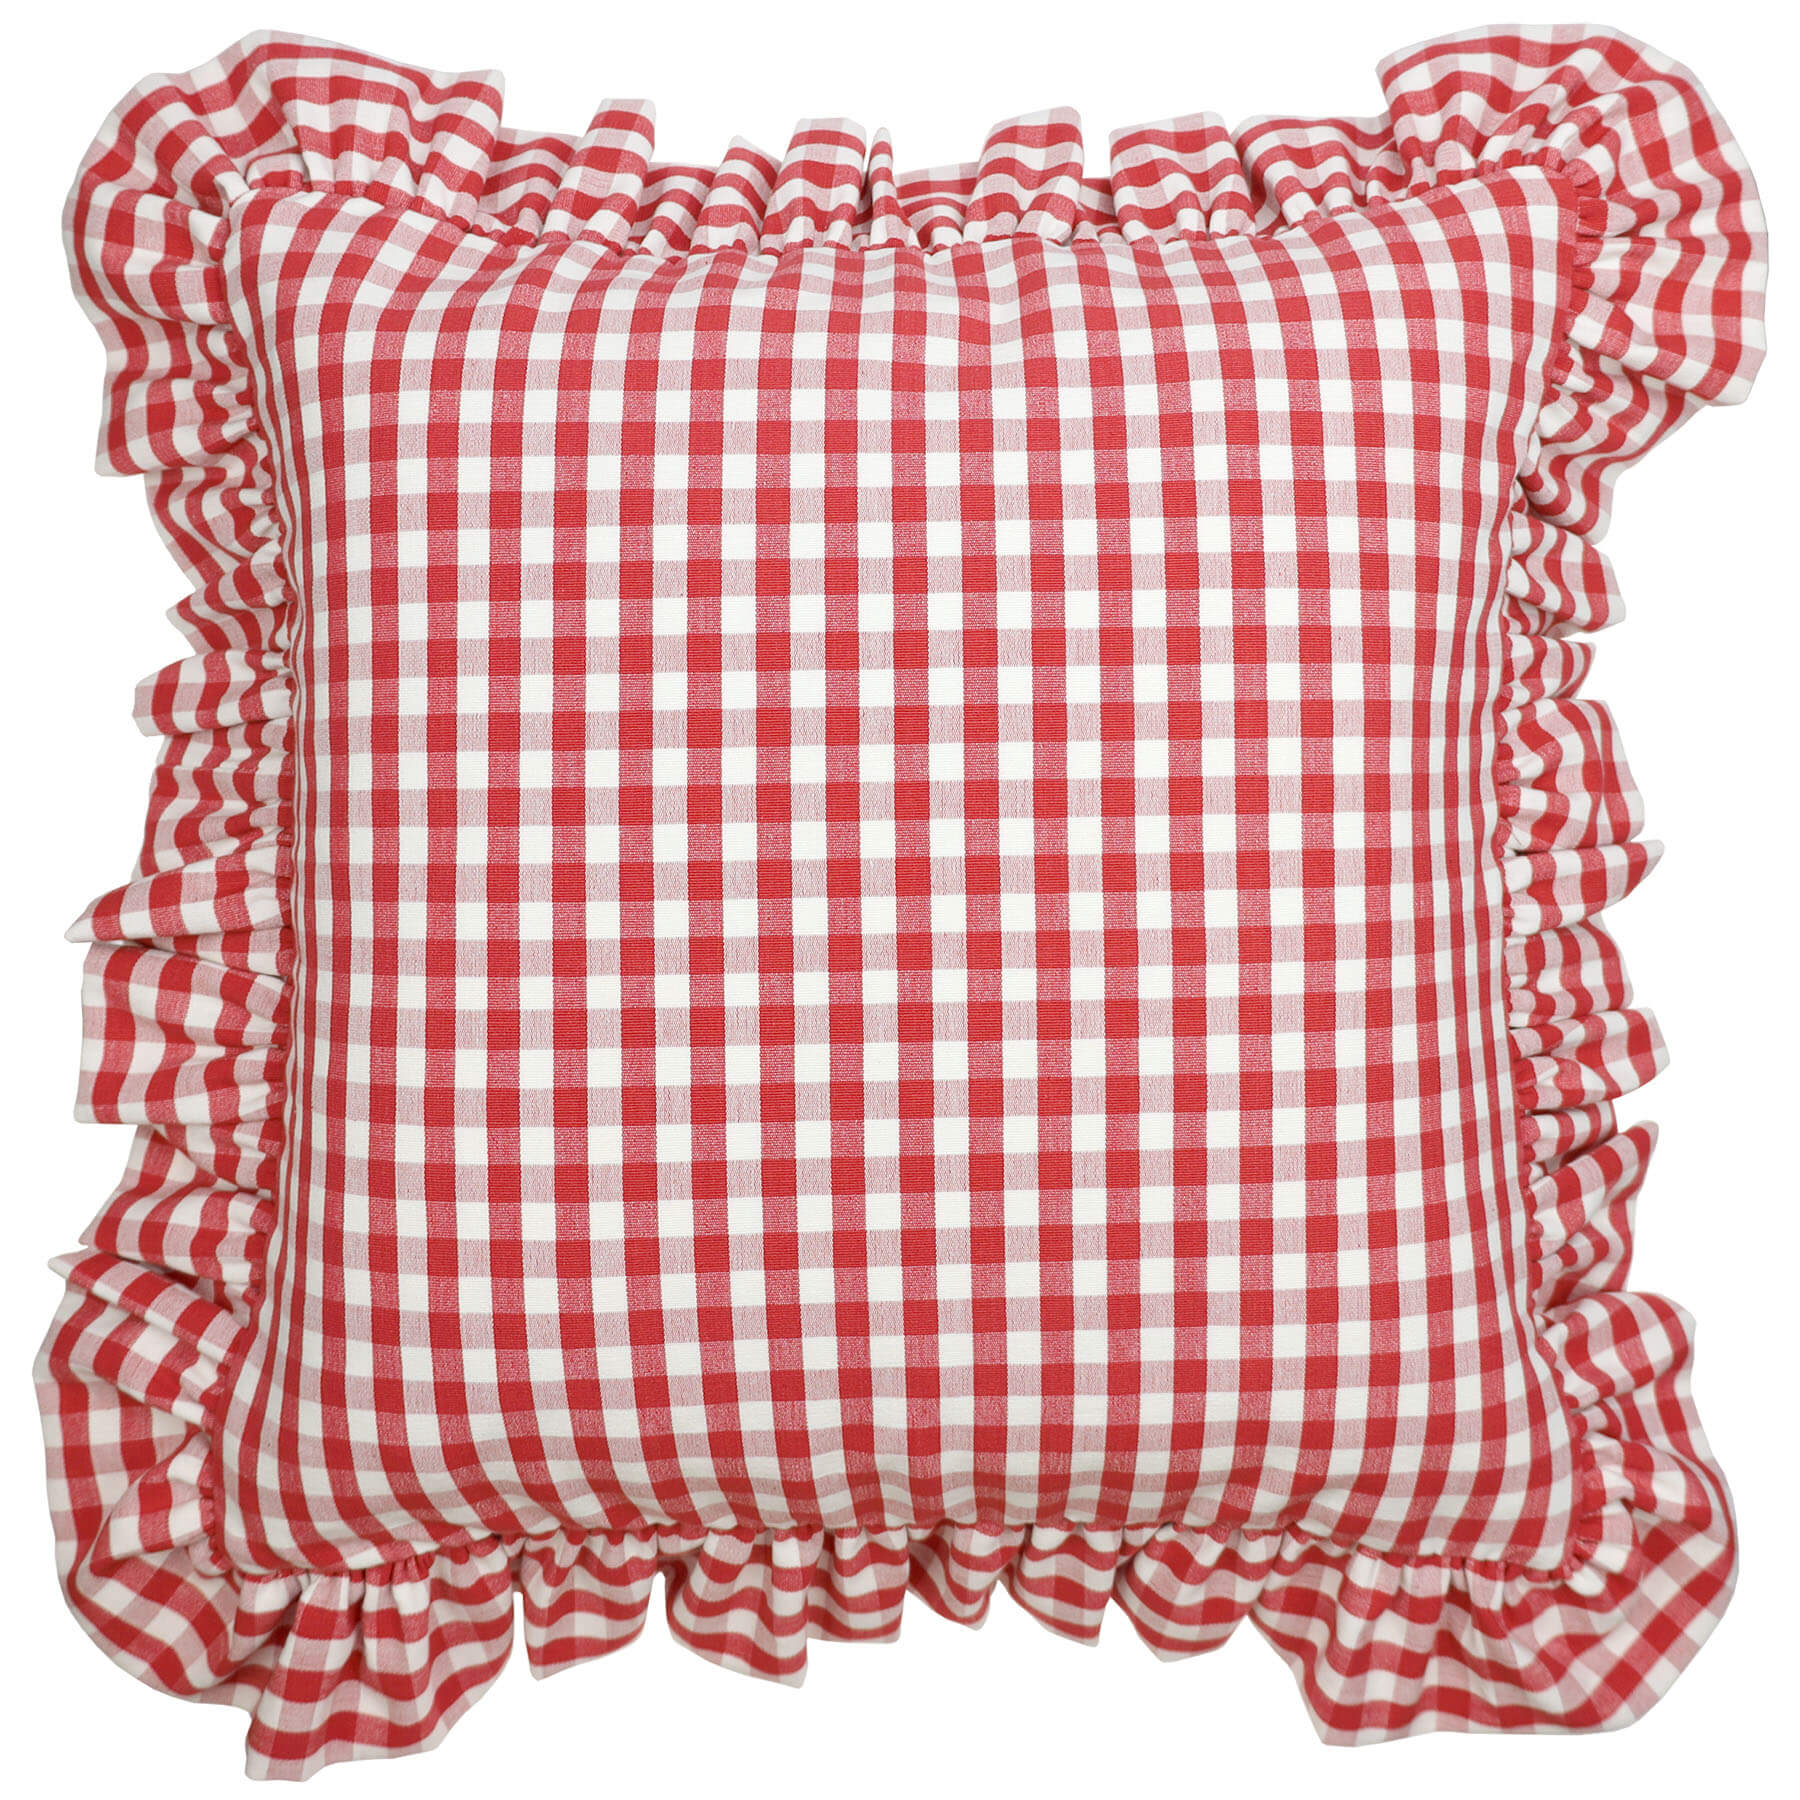 Red Gingham cushion with a frilled edge